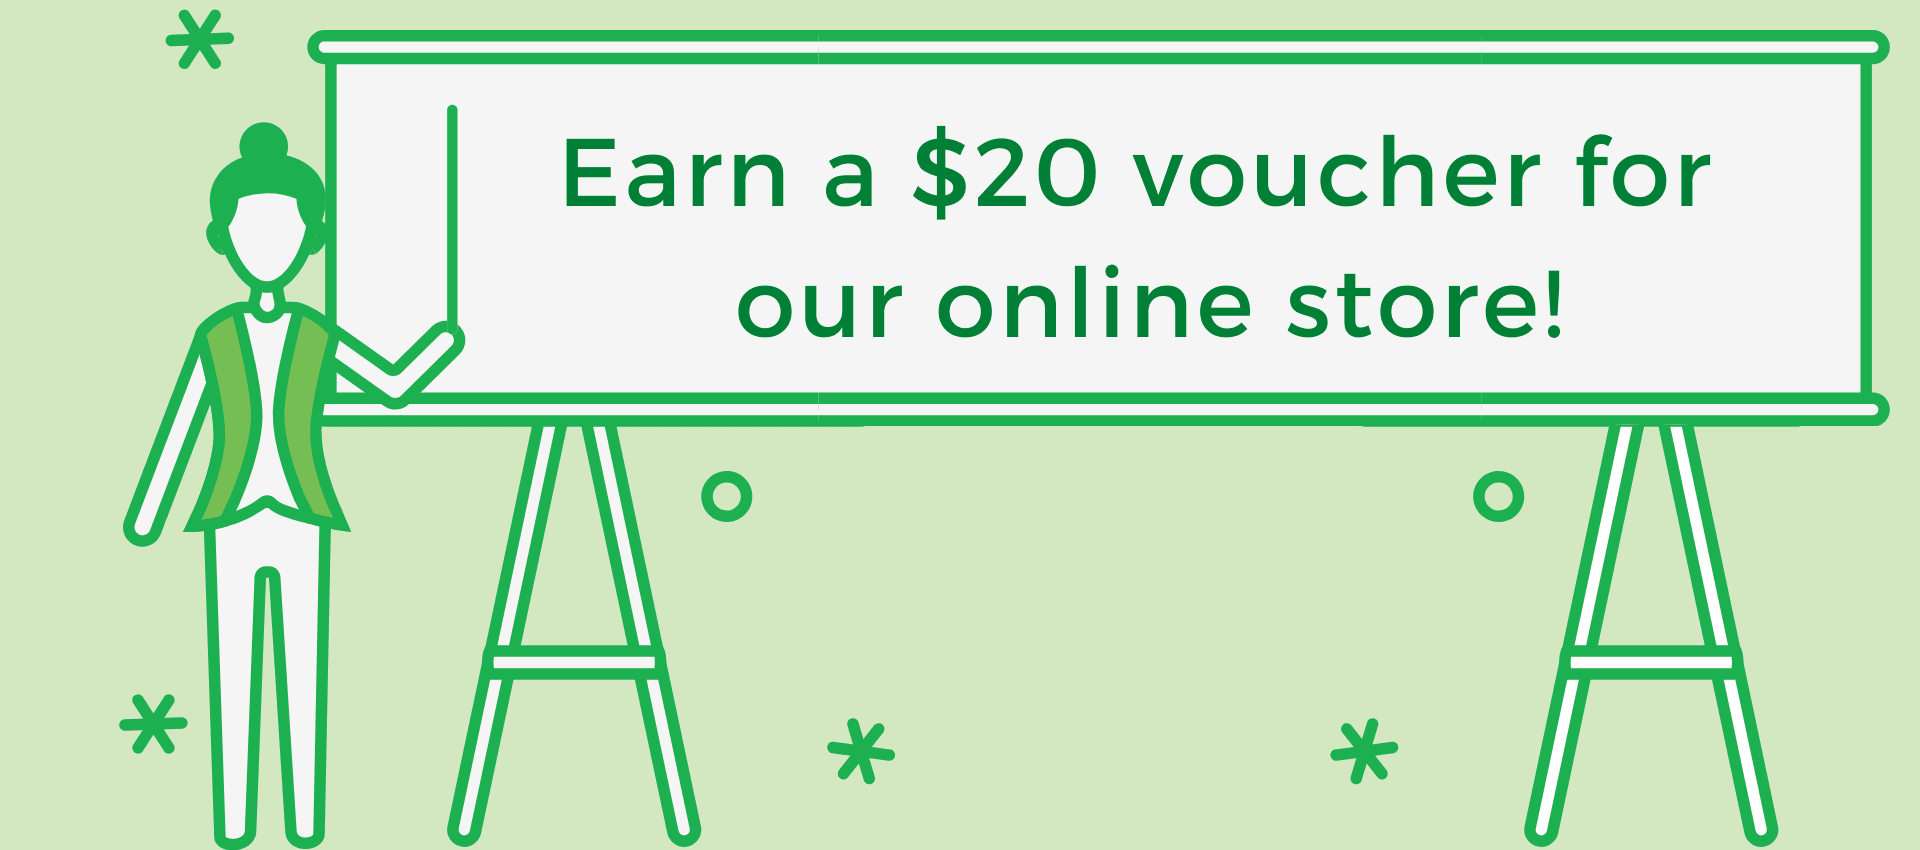 You Could Receive $20 Worth of Store Credit, FREE!